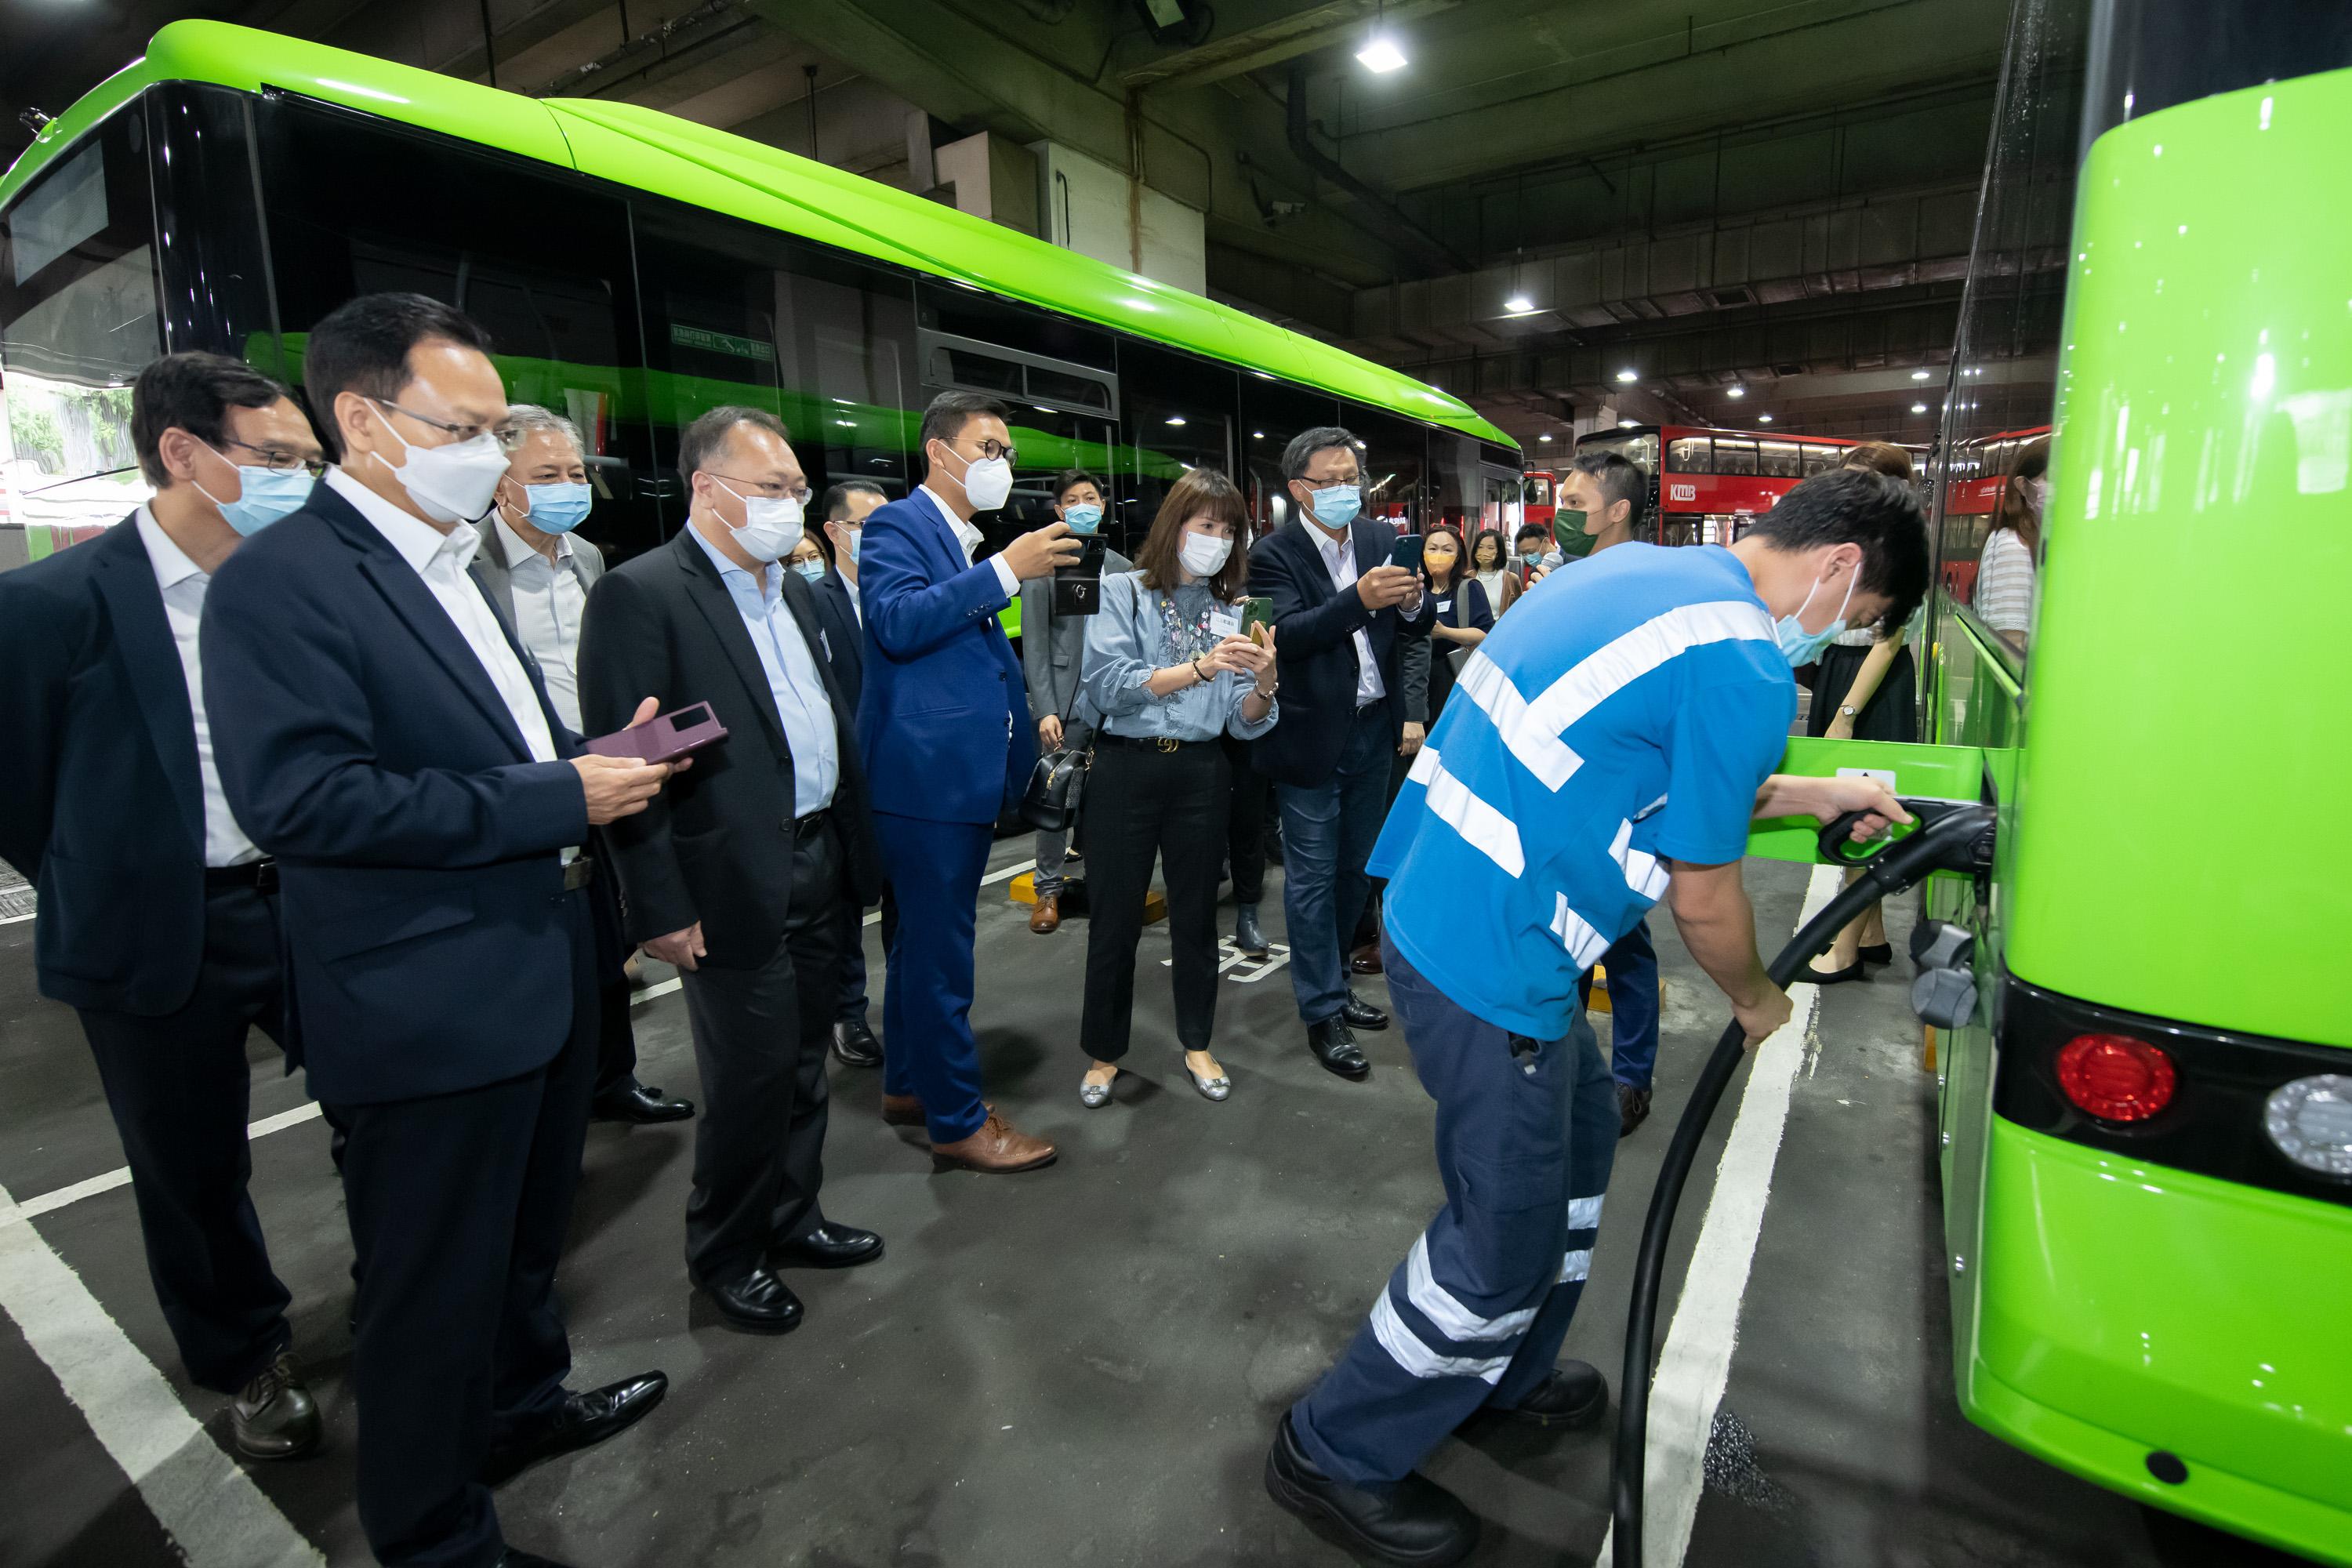 The Legislative Council (LegCo) Panel on Transport visits the bus depot of The Kowloon Motor Bus Company (1933) Limited (KMB) today (June 10). Photo shows LegCo Members visiting the charging facilities in KMB's bus depot after taking a ride on the new-generation single-deck electric bus.